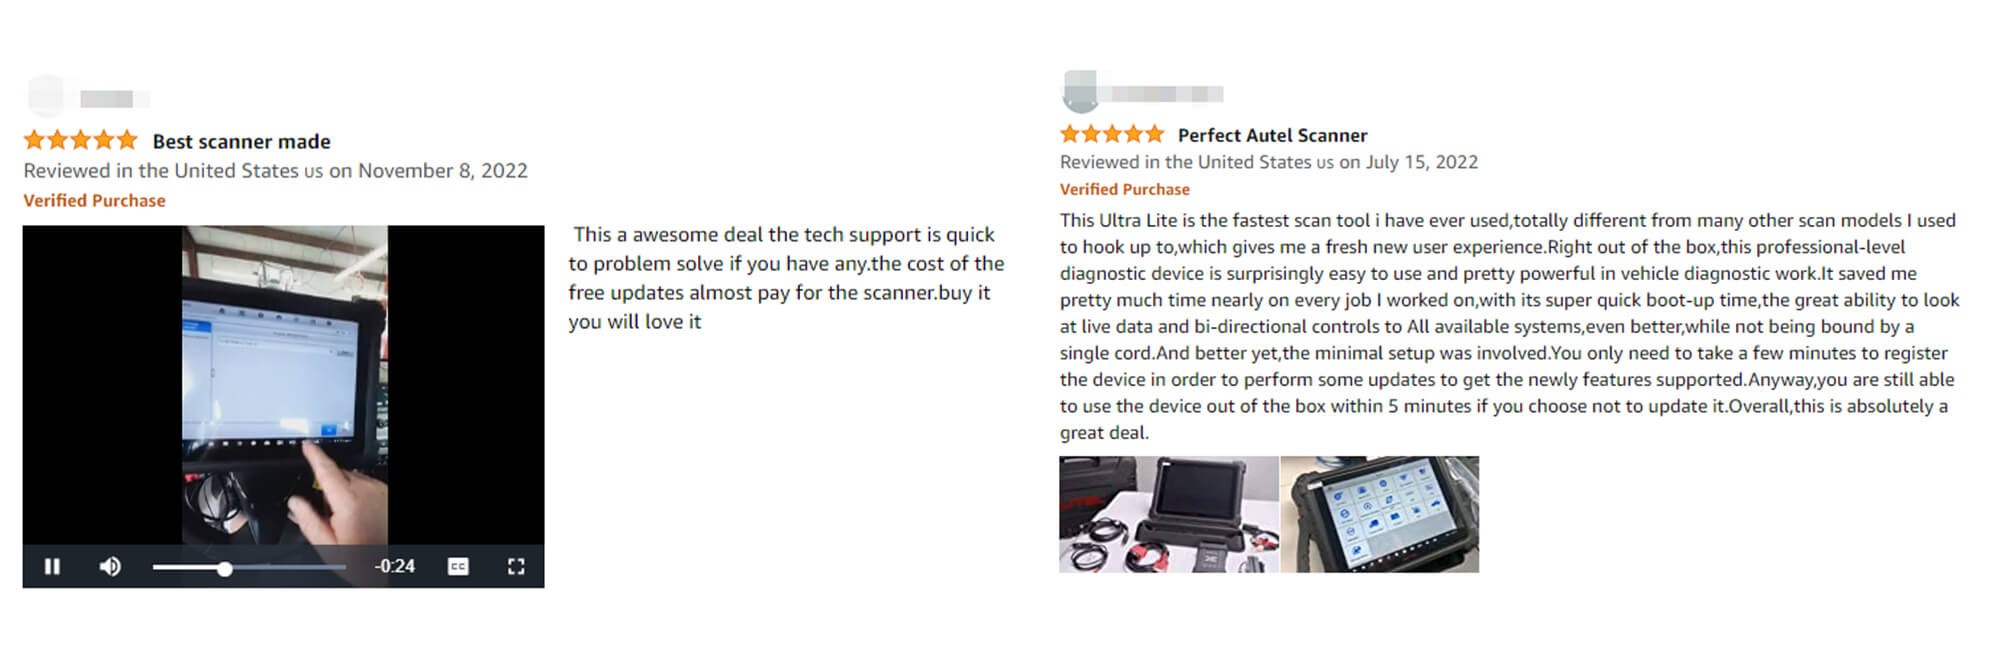 Autel Ultra Lite scanner received many positive comments